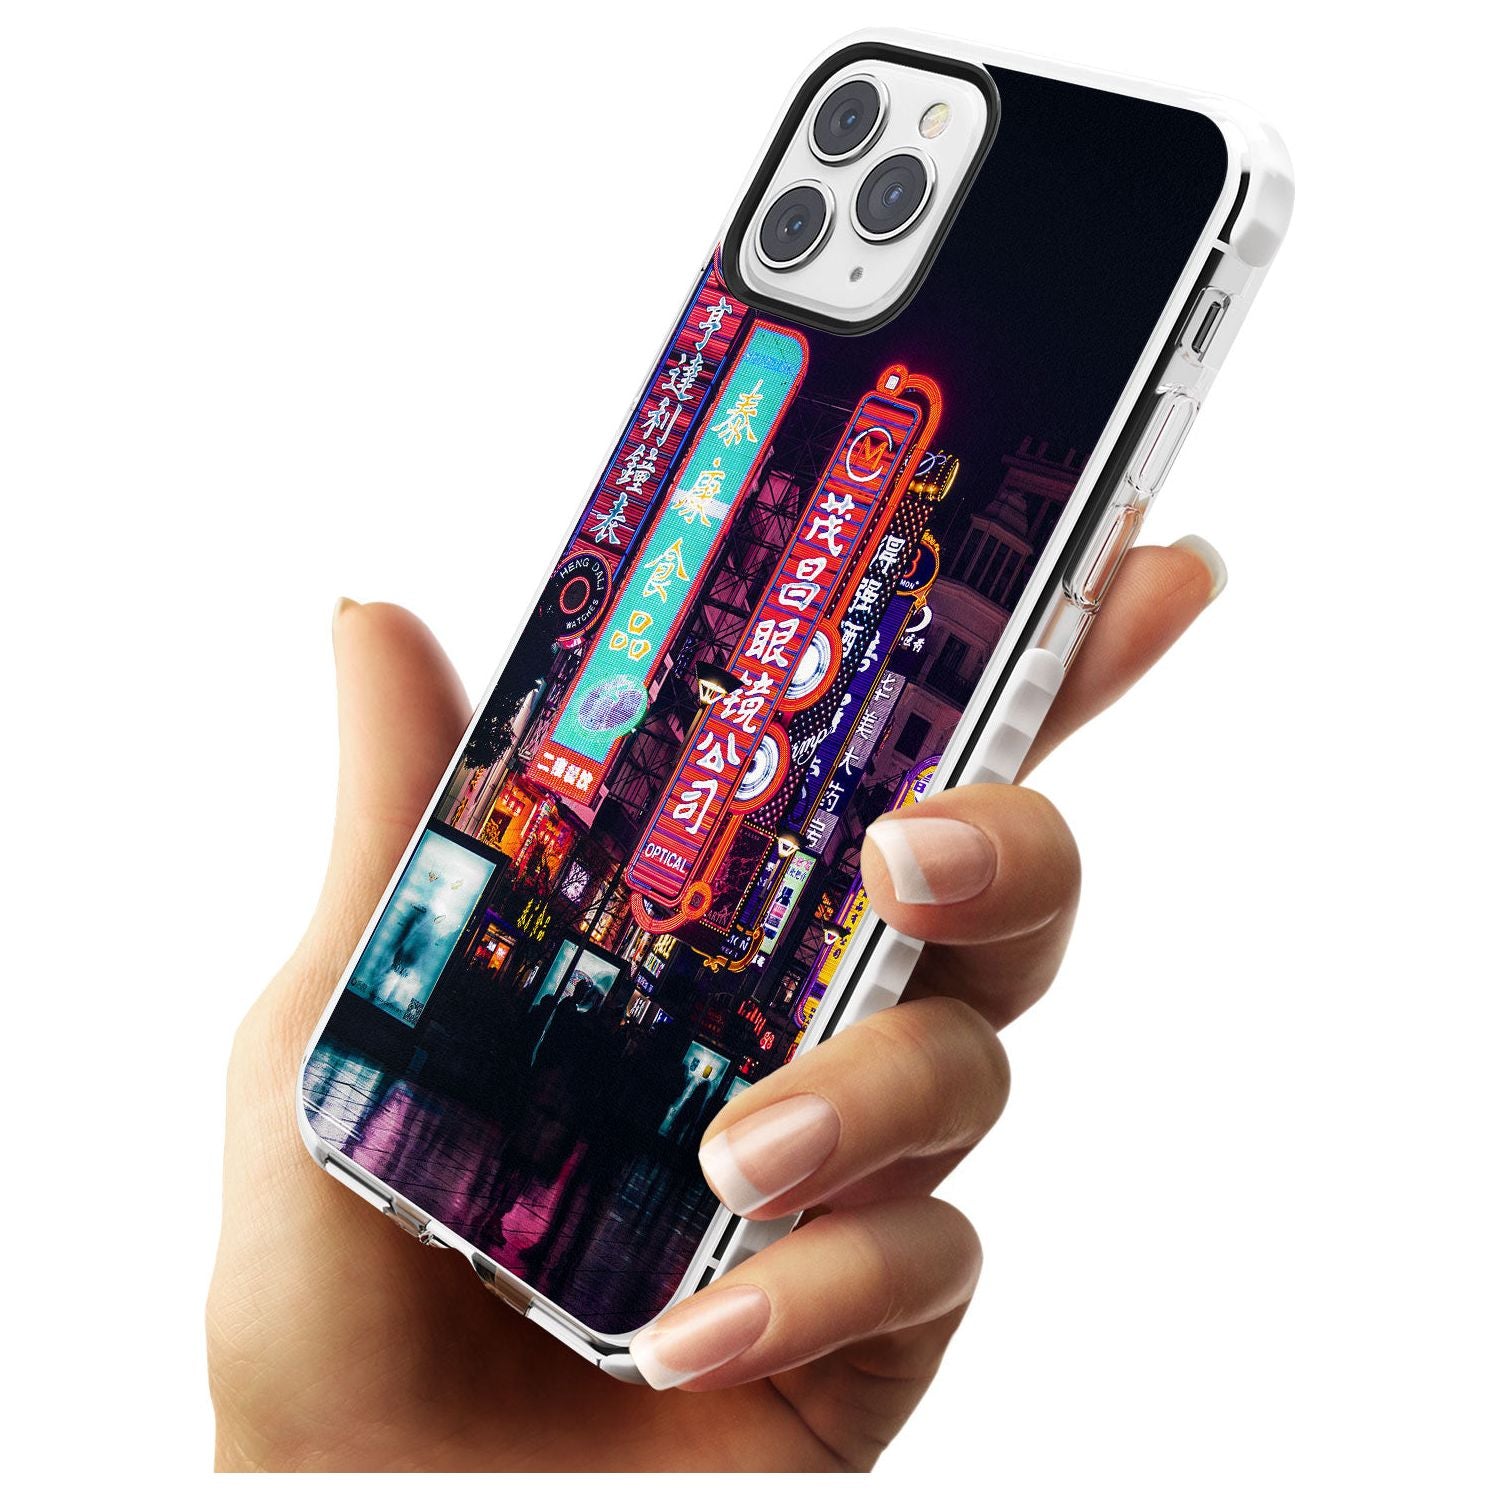 Busy Street - Neon Cities Photographs Impact Phone Case for iPhone 11 Pro Max